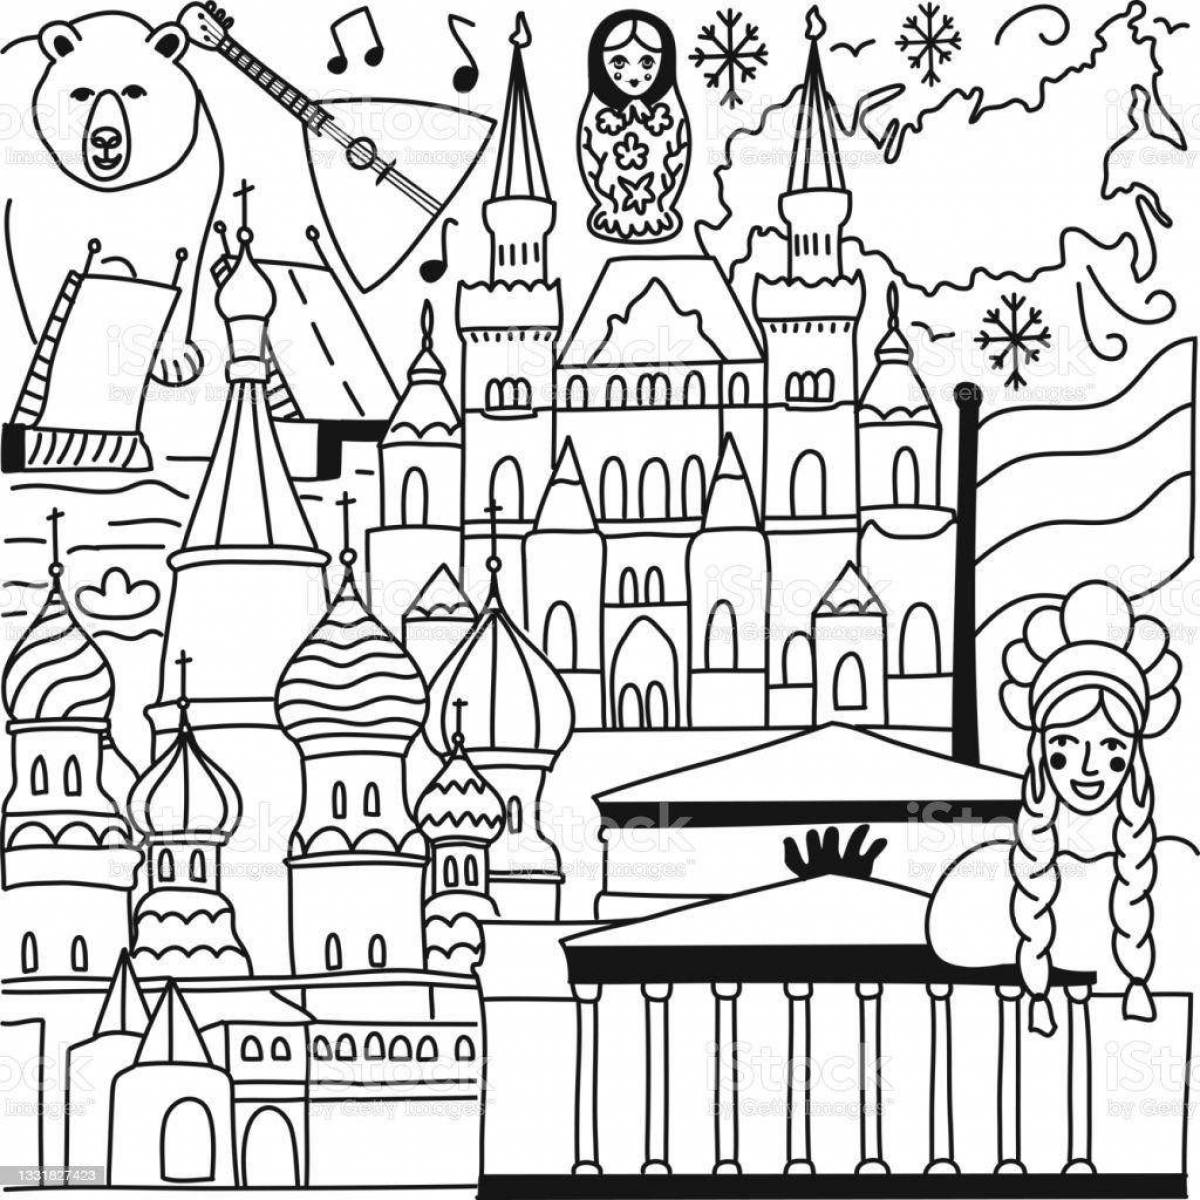 Coloring the Moscow Kremlin for children